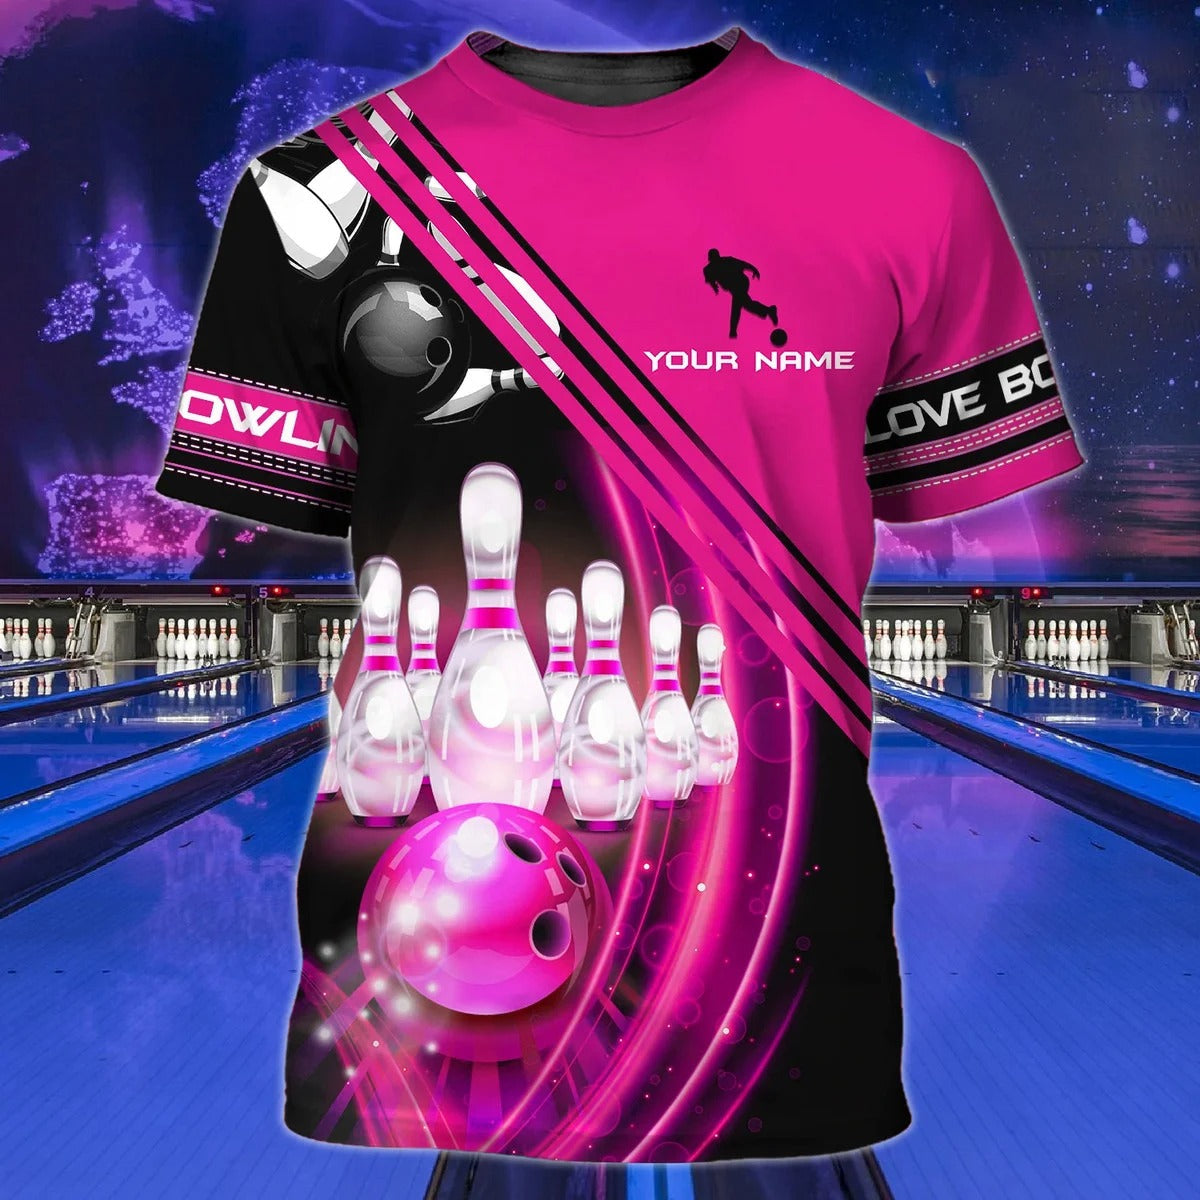 Blue Bowling Shirt For Men Women/ Personalized Name 3D All Over Print Shirt For Bowler/ Bowling Player Team Uniform/ Bowling Gifts